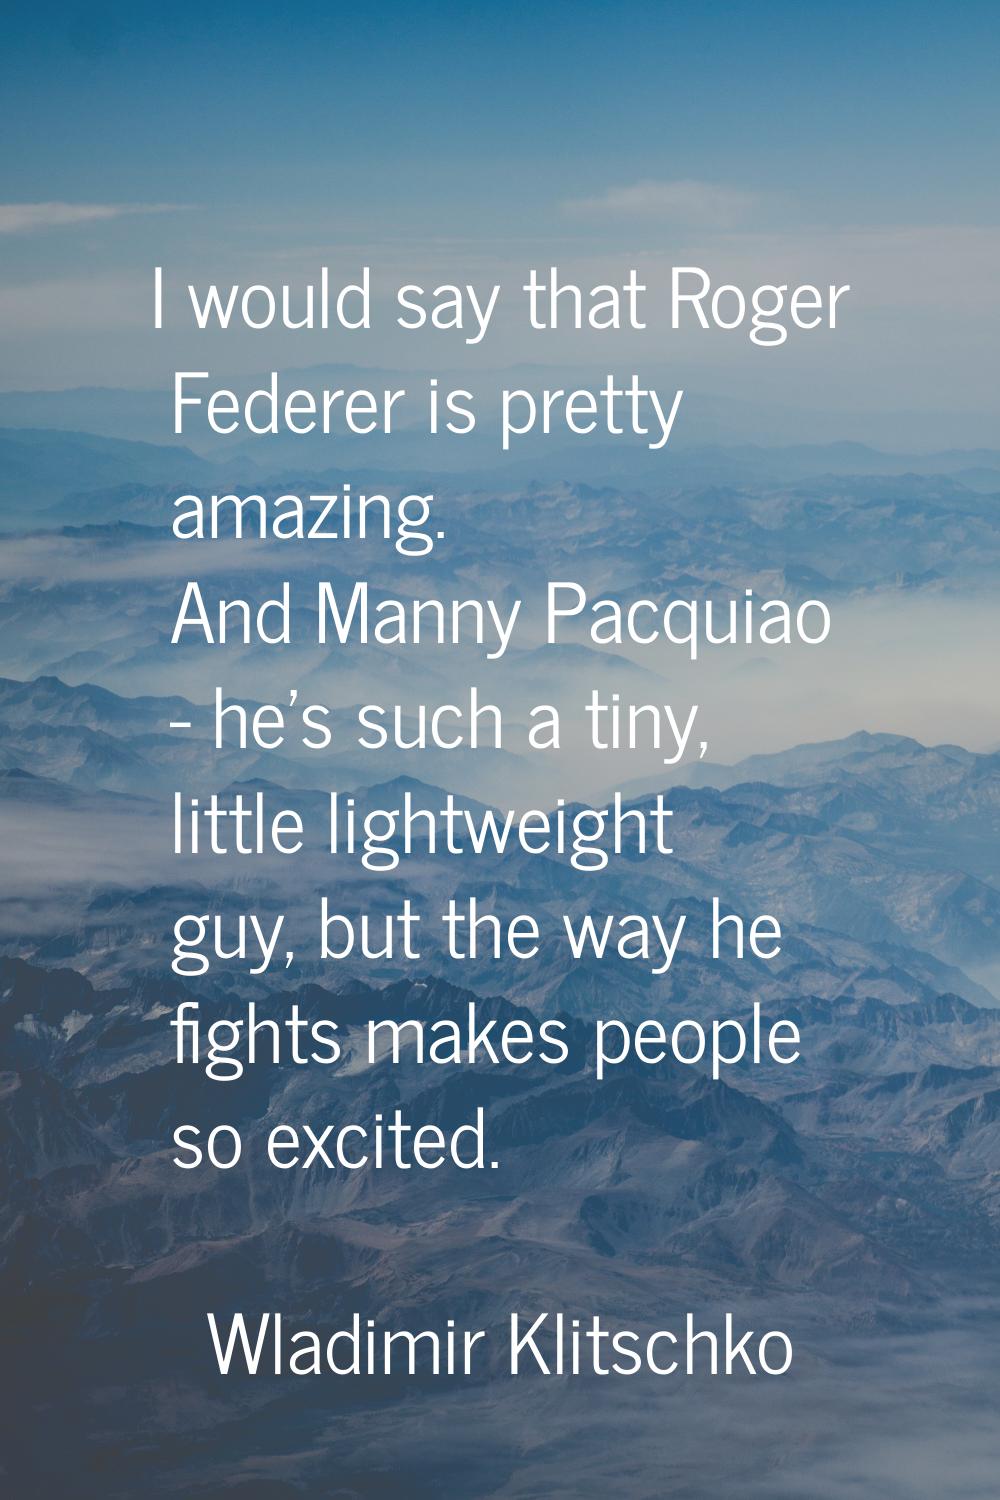 I would say that Roger Federer is pretty amazing. And Manny Pacquiao - he's such a tiny, little lig